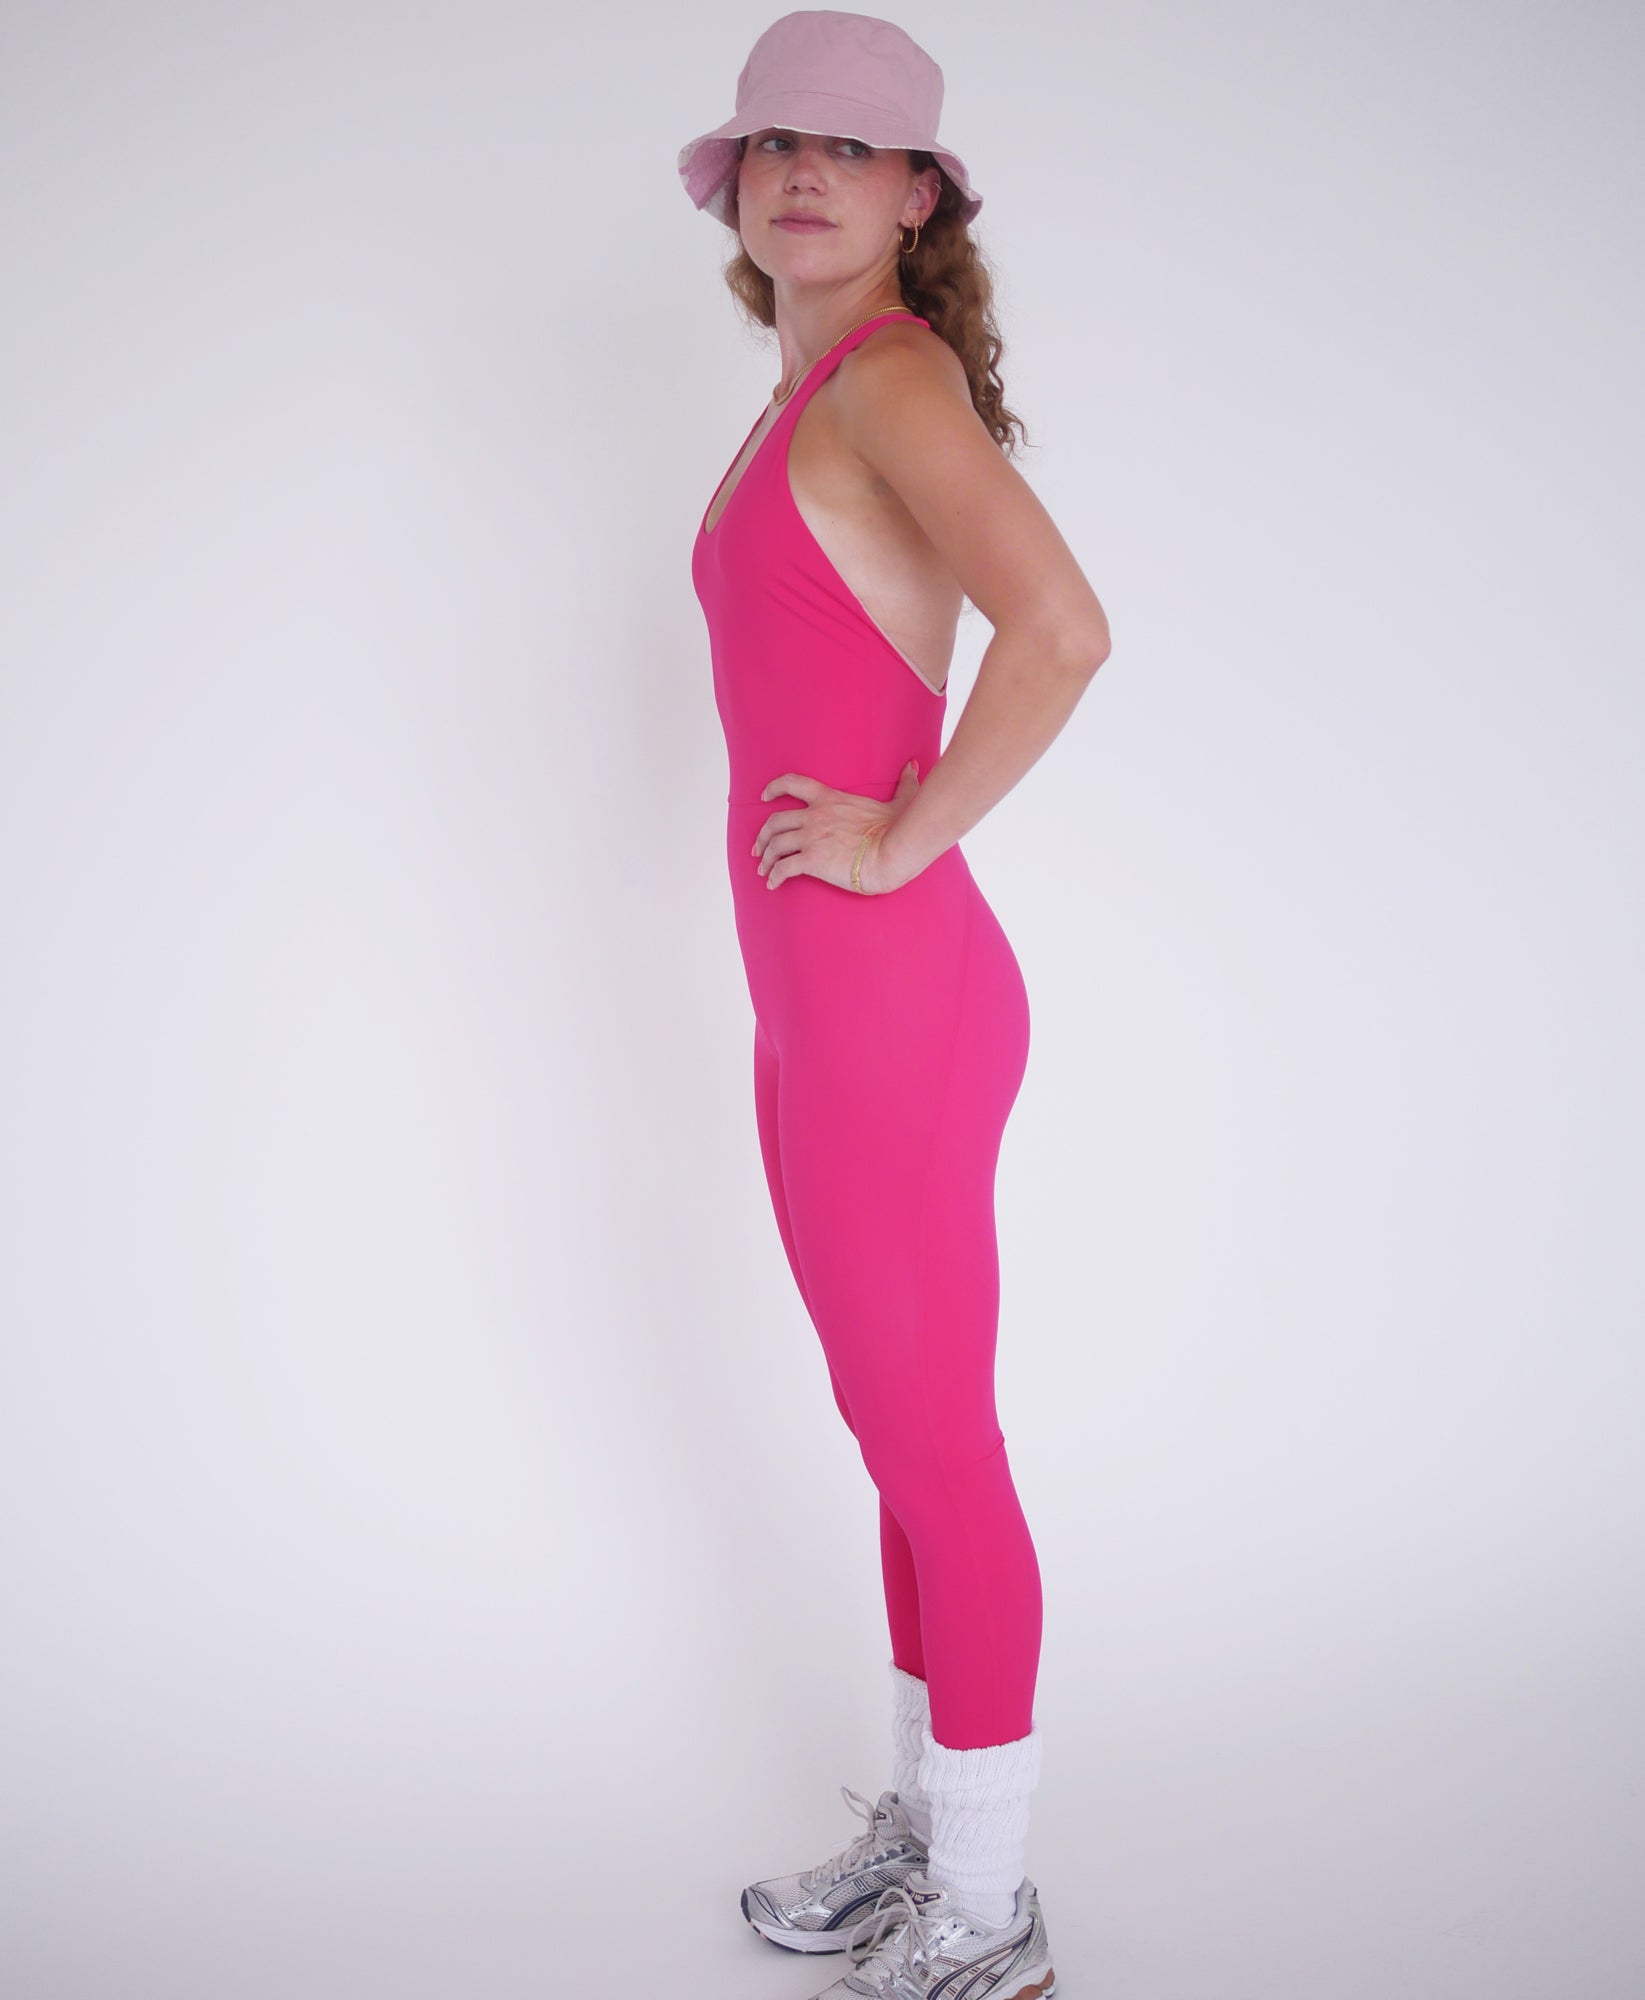 Wear One's At Liberty Unitard in Barbie on Model Side View